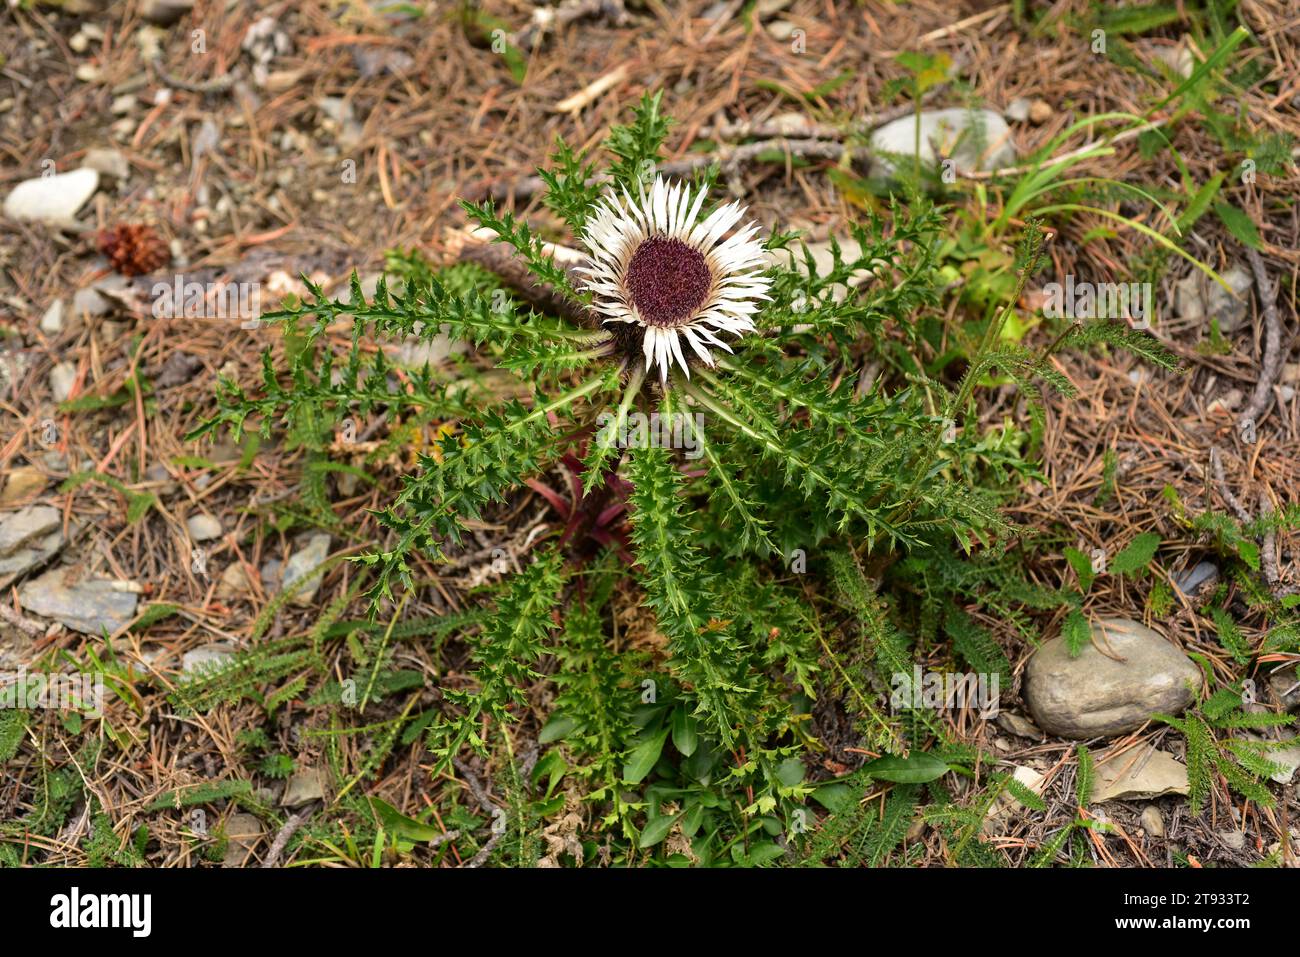 Dwarf carline thistle or silver thistle (Carlina acaulis) is a perennial plant native to alpine regions of Europe. Thid photo was taken in Montgarri, Stock Photo